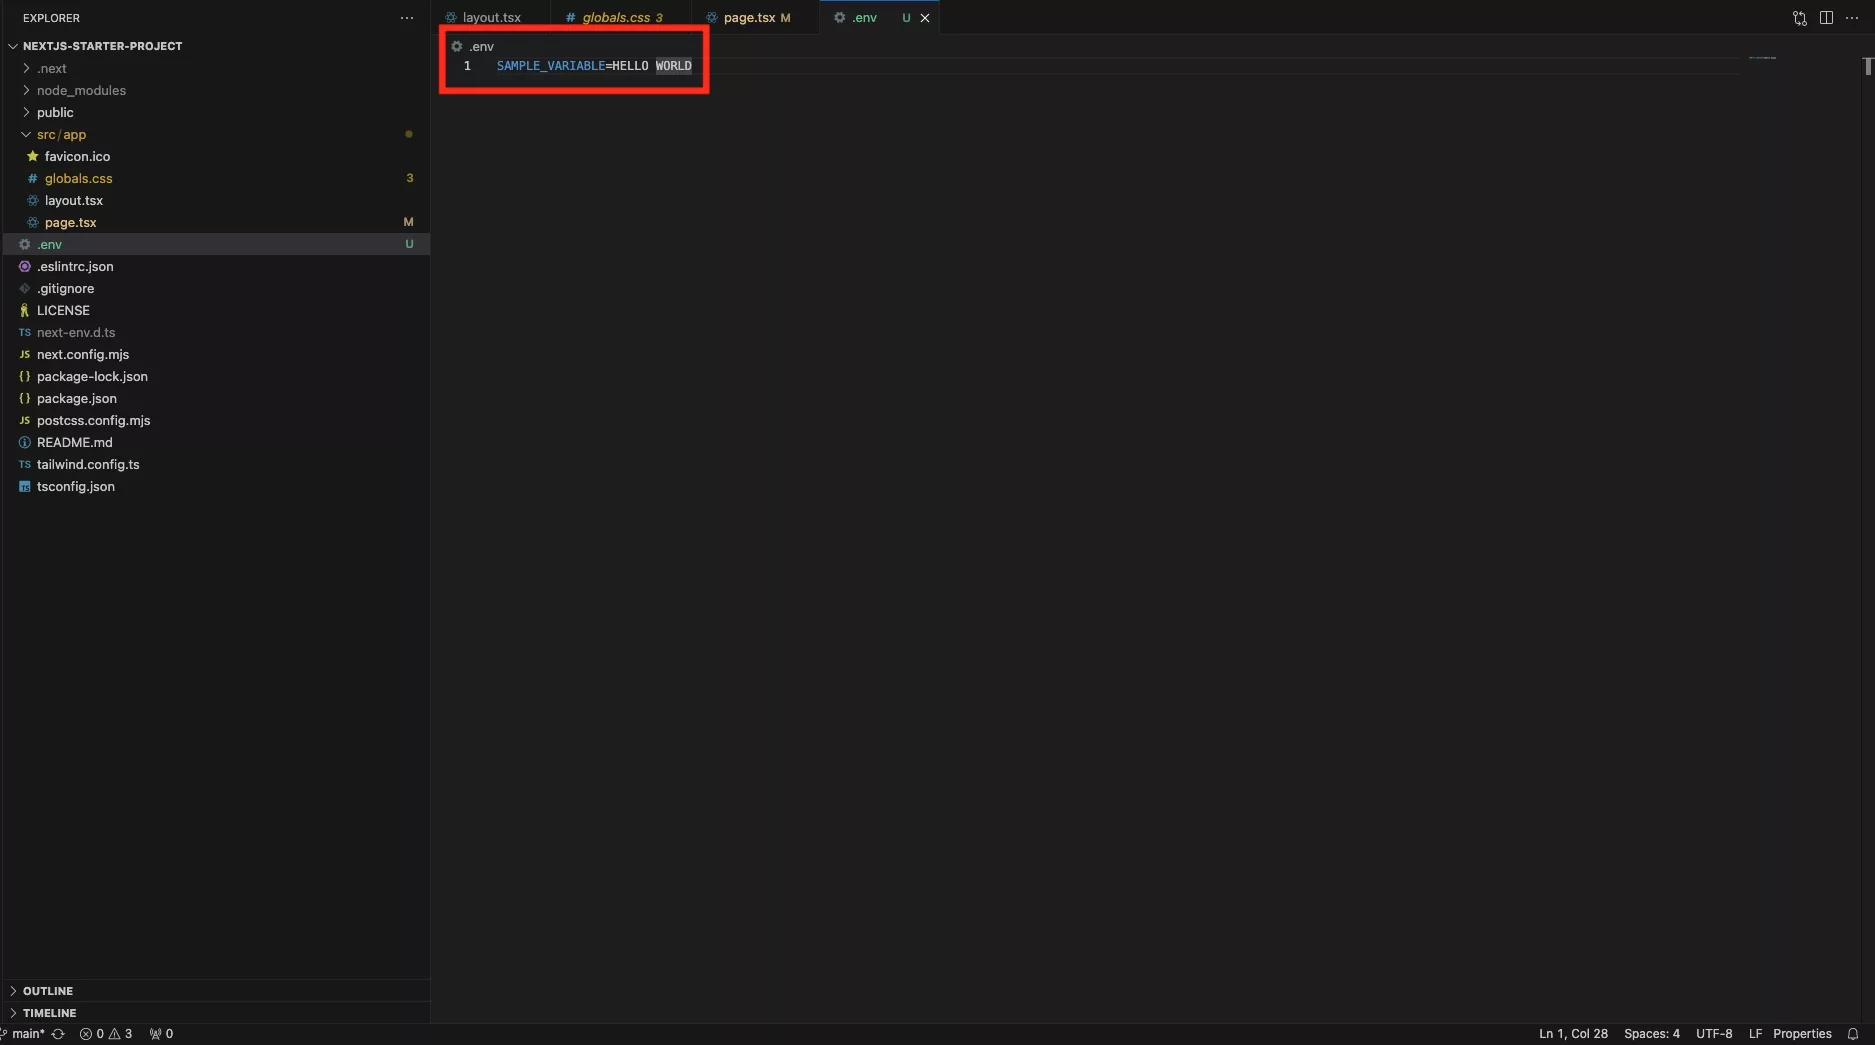 A screenshot of VSCode .env file with a "SAMPLE_VARIABLE" environment variable. The variable is defined to equal "Hello World."